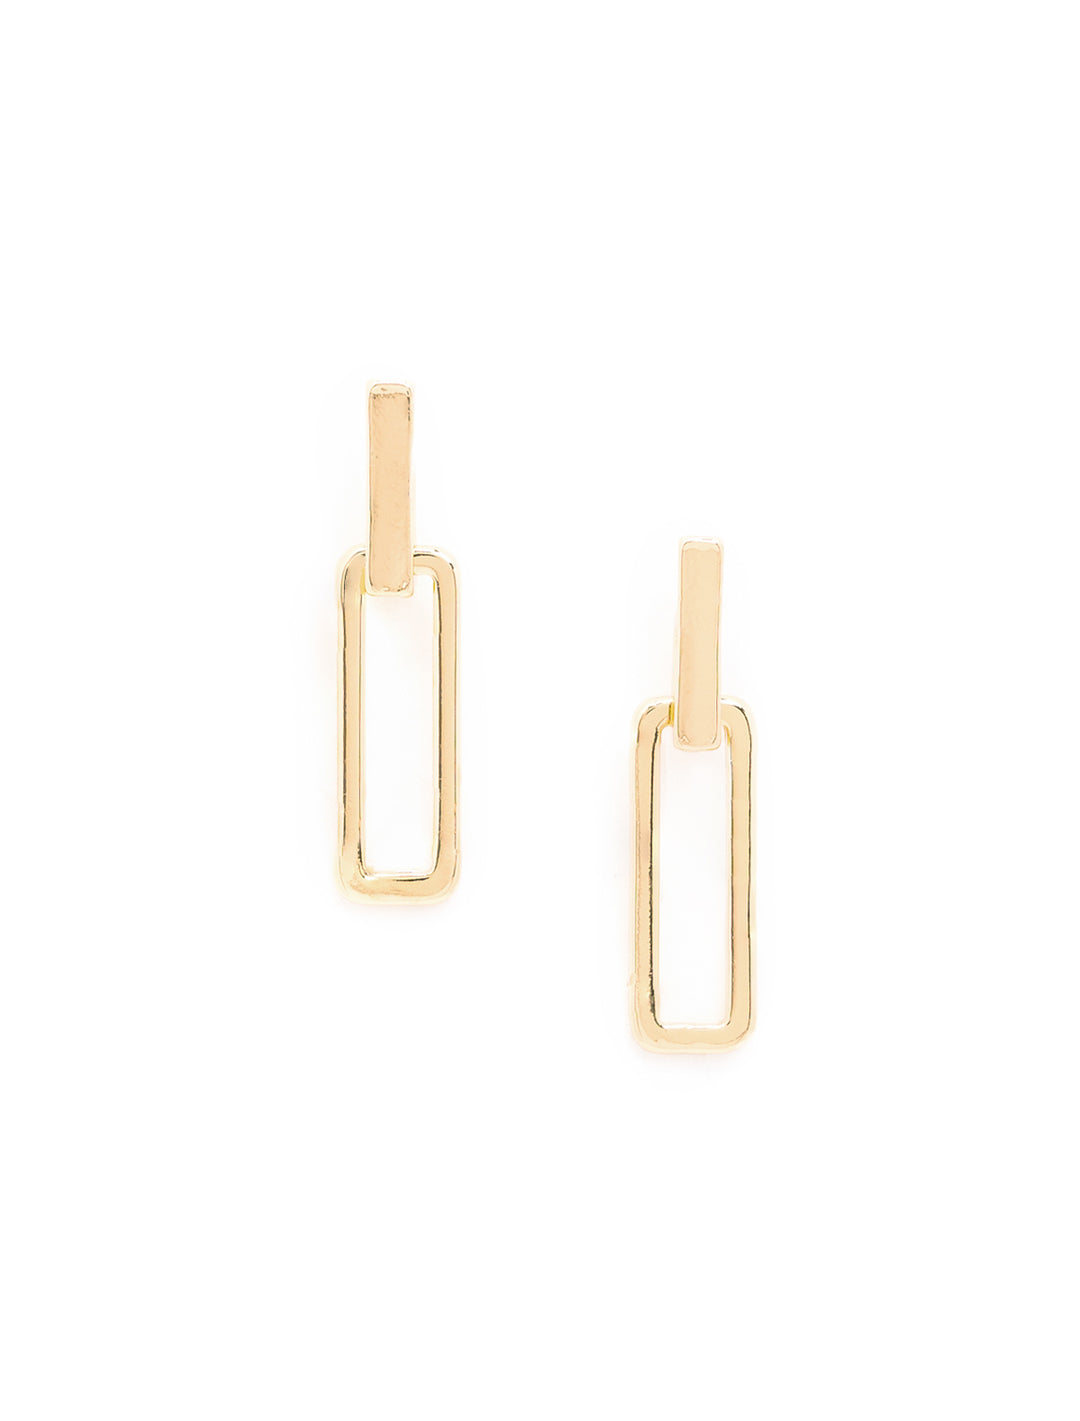 Front view of AV Max's Paperclip Chain Post Earrings in Gold.